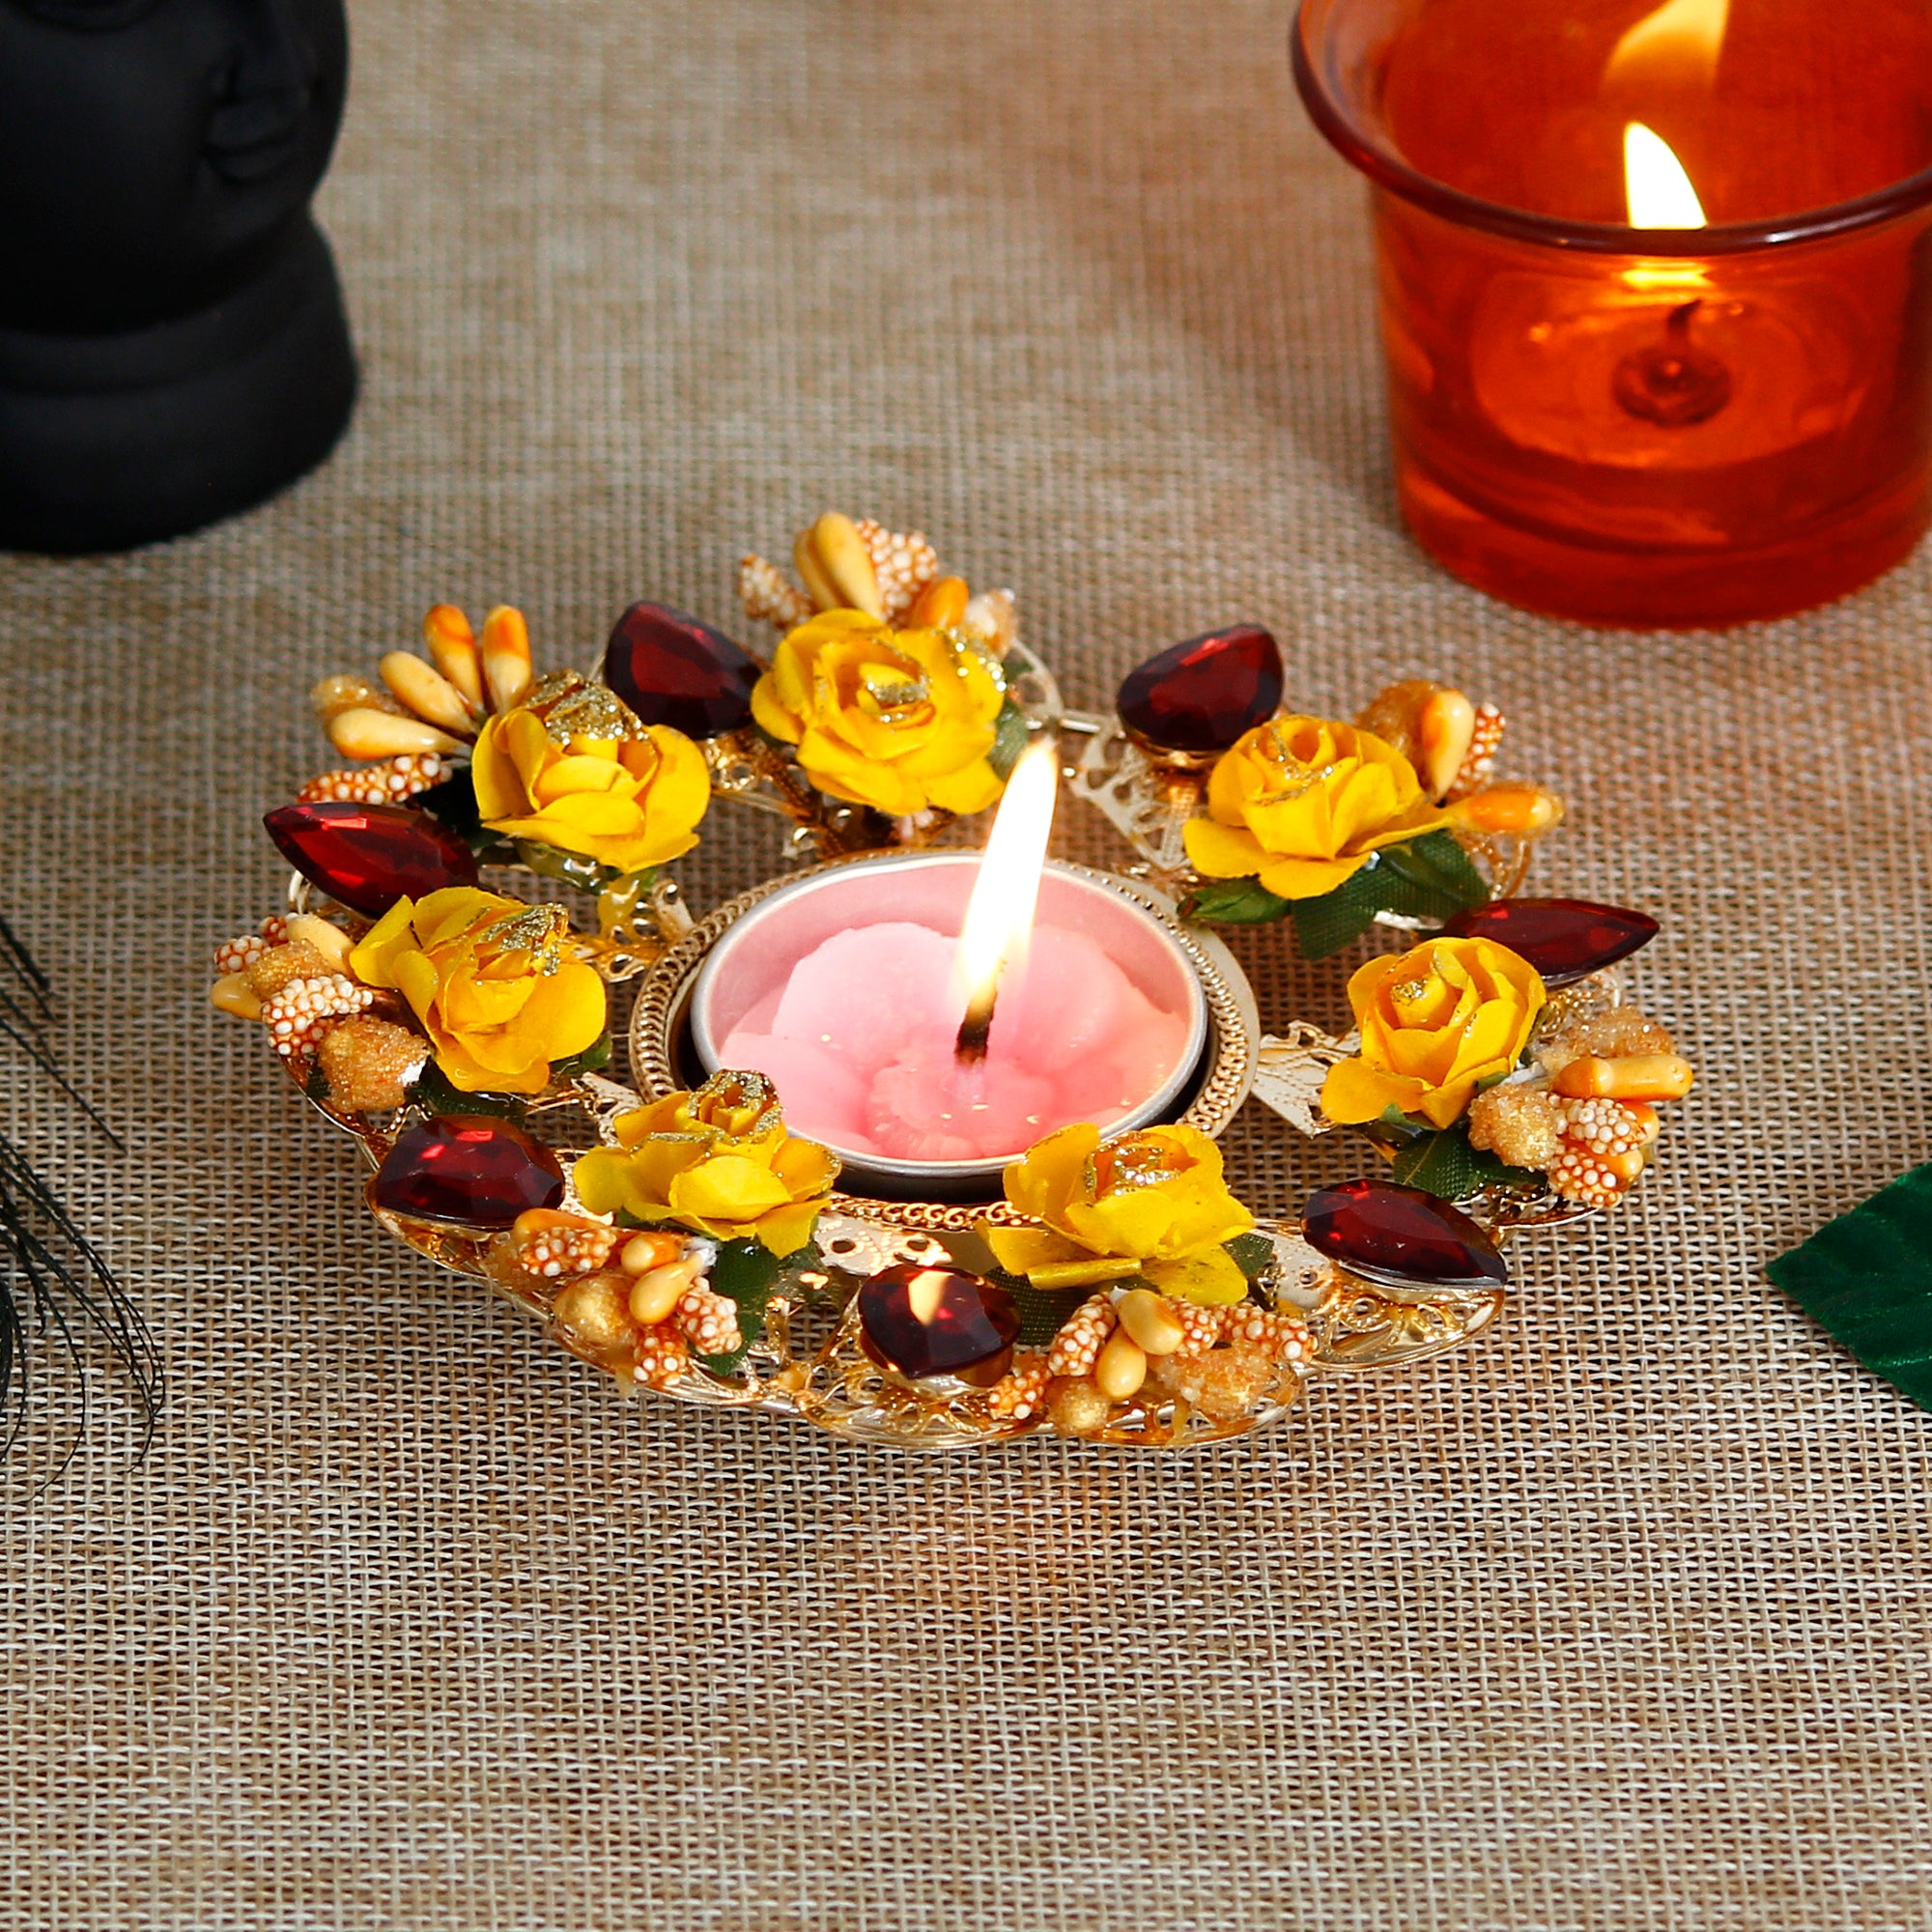 Decorative Handcrafted Yellow and Red Floral Tea Light Holder